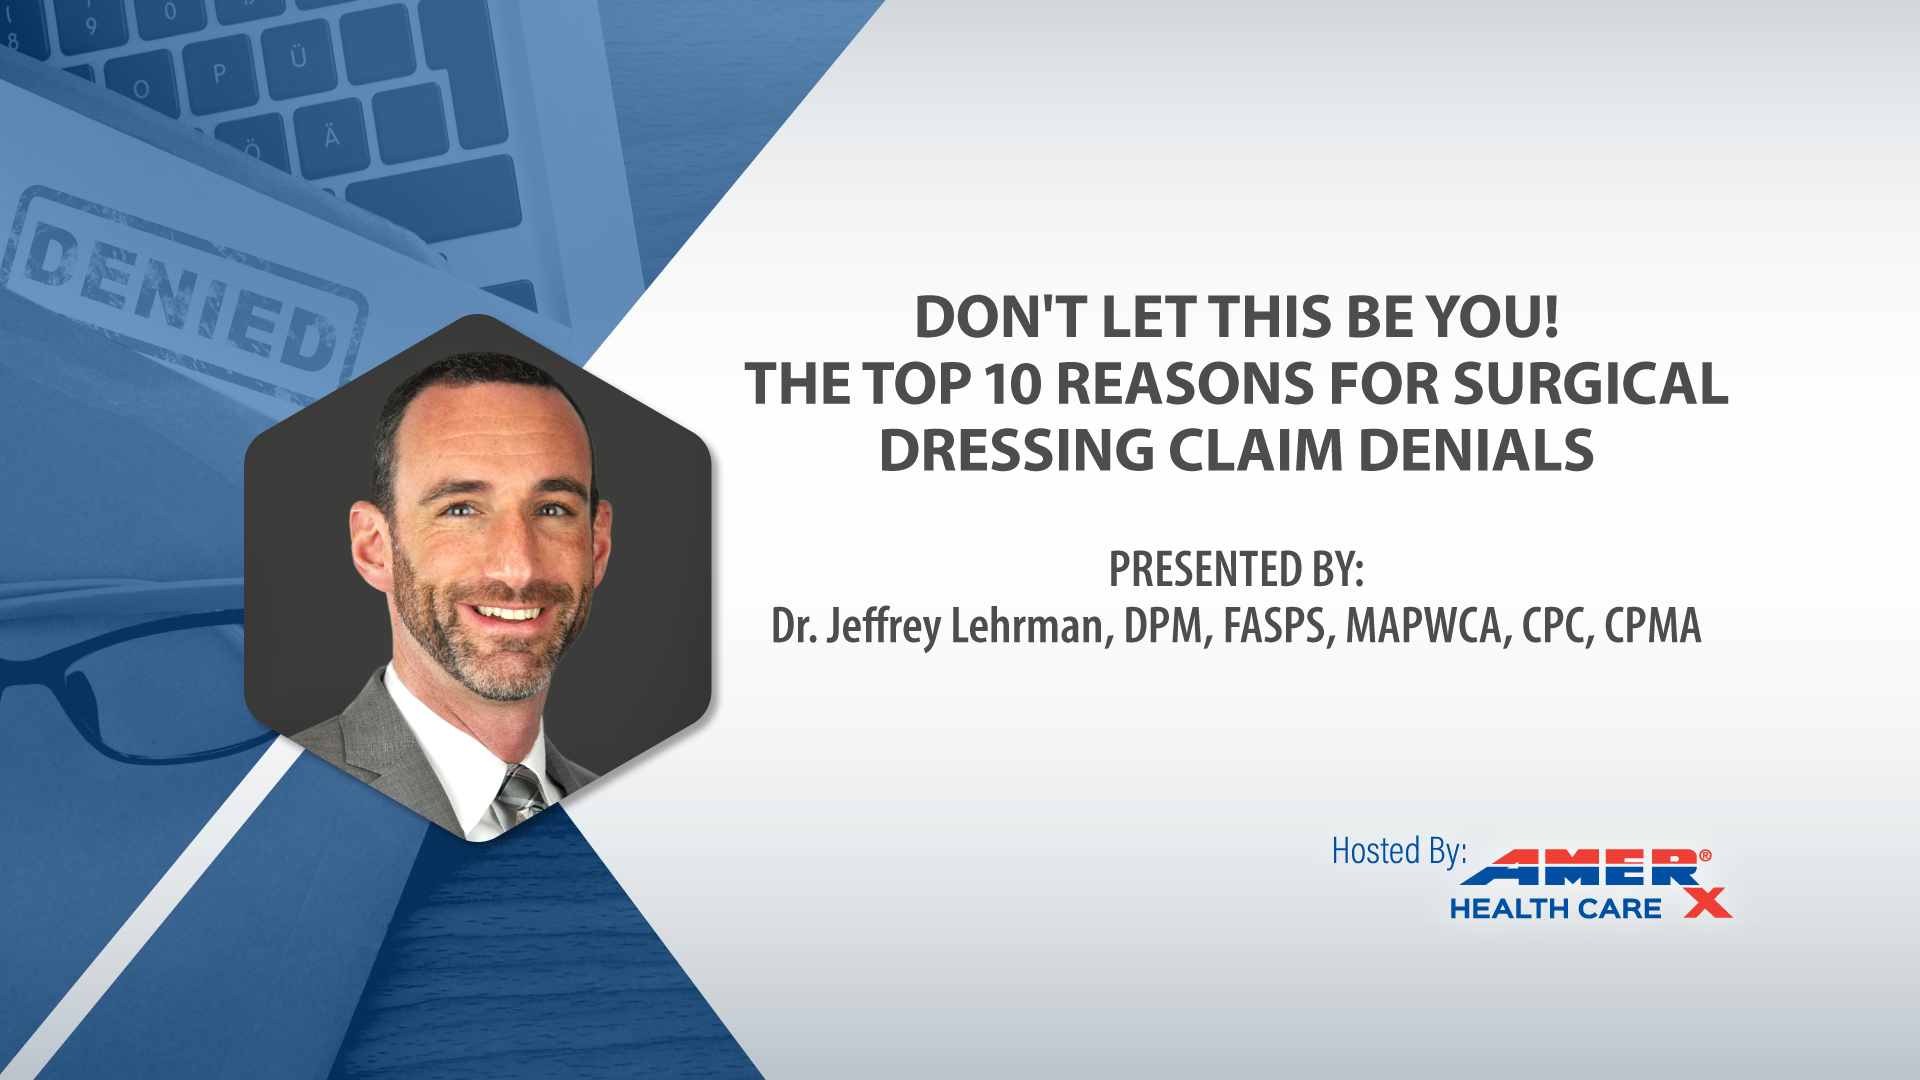 Webinar - Don't Let This Be You! The Top 10 Reasons for Surgical Dressing Claim Denials